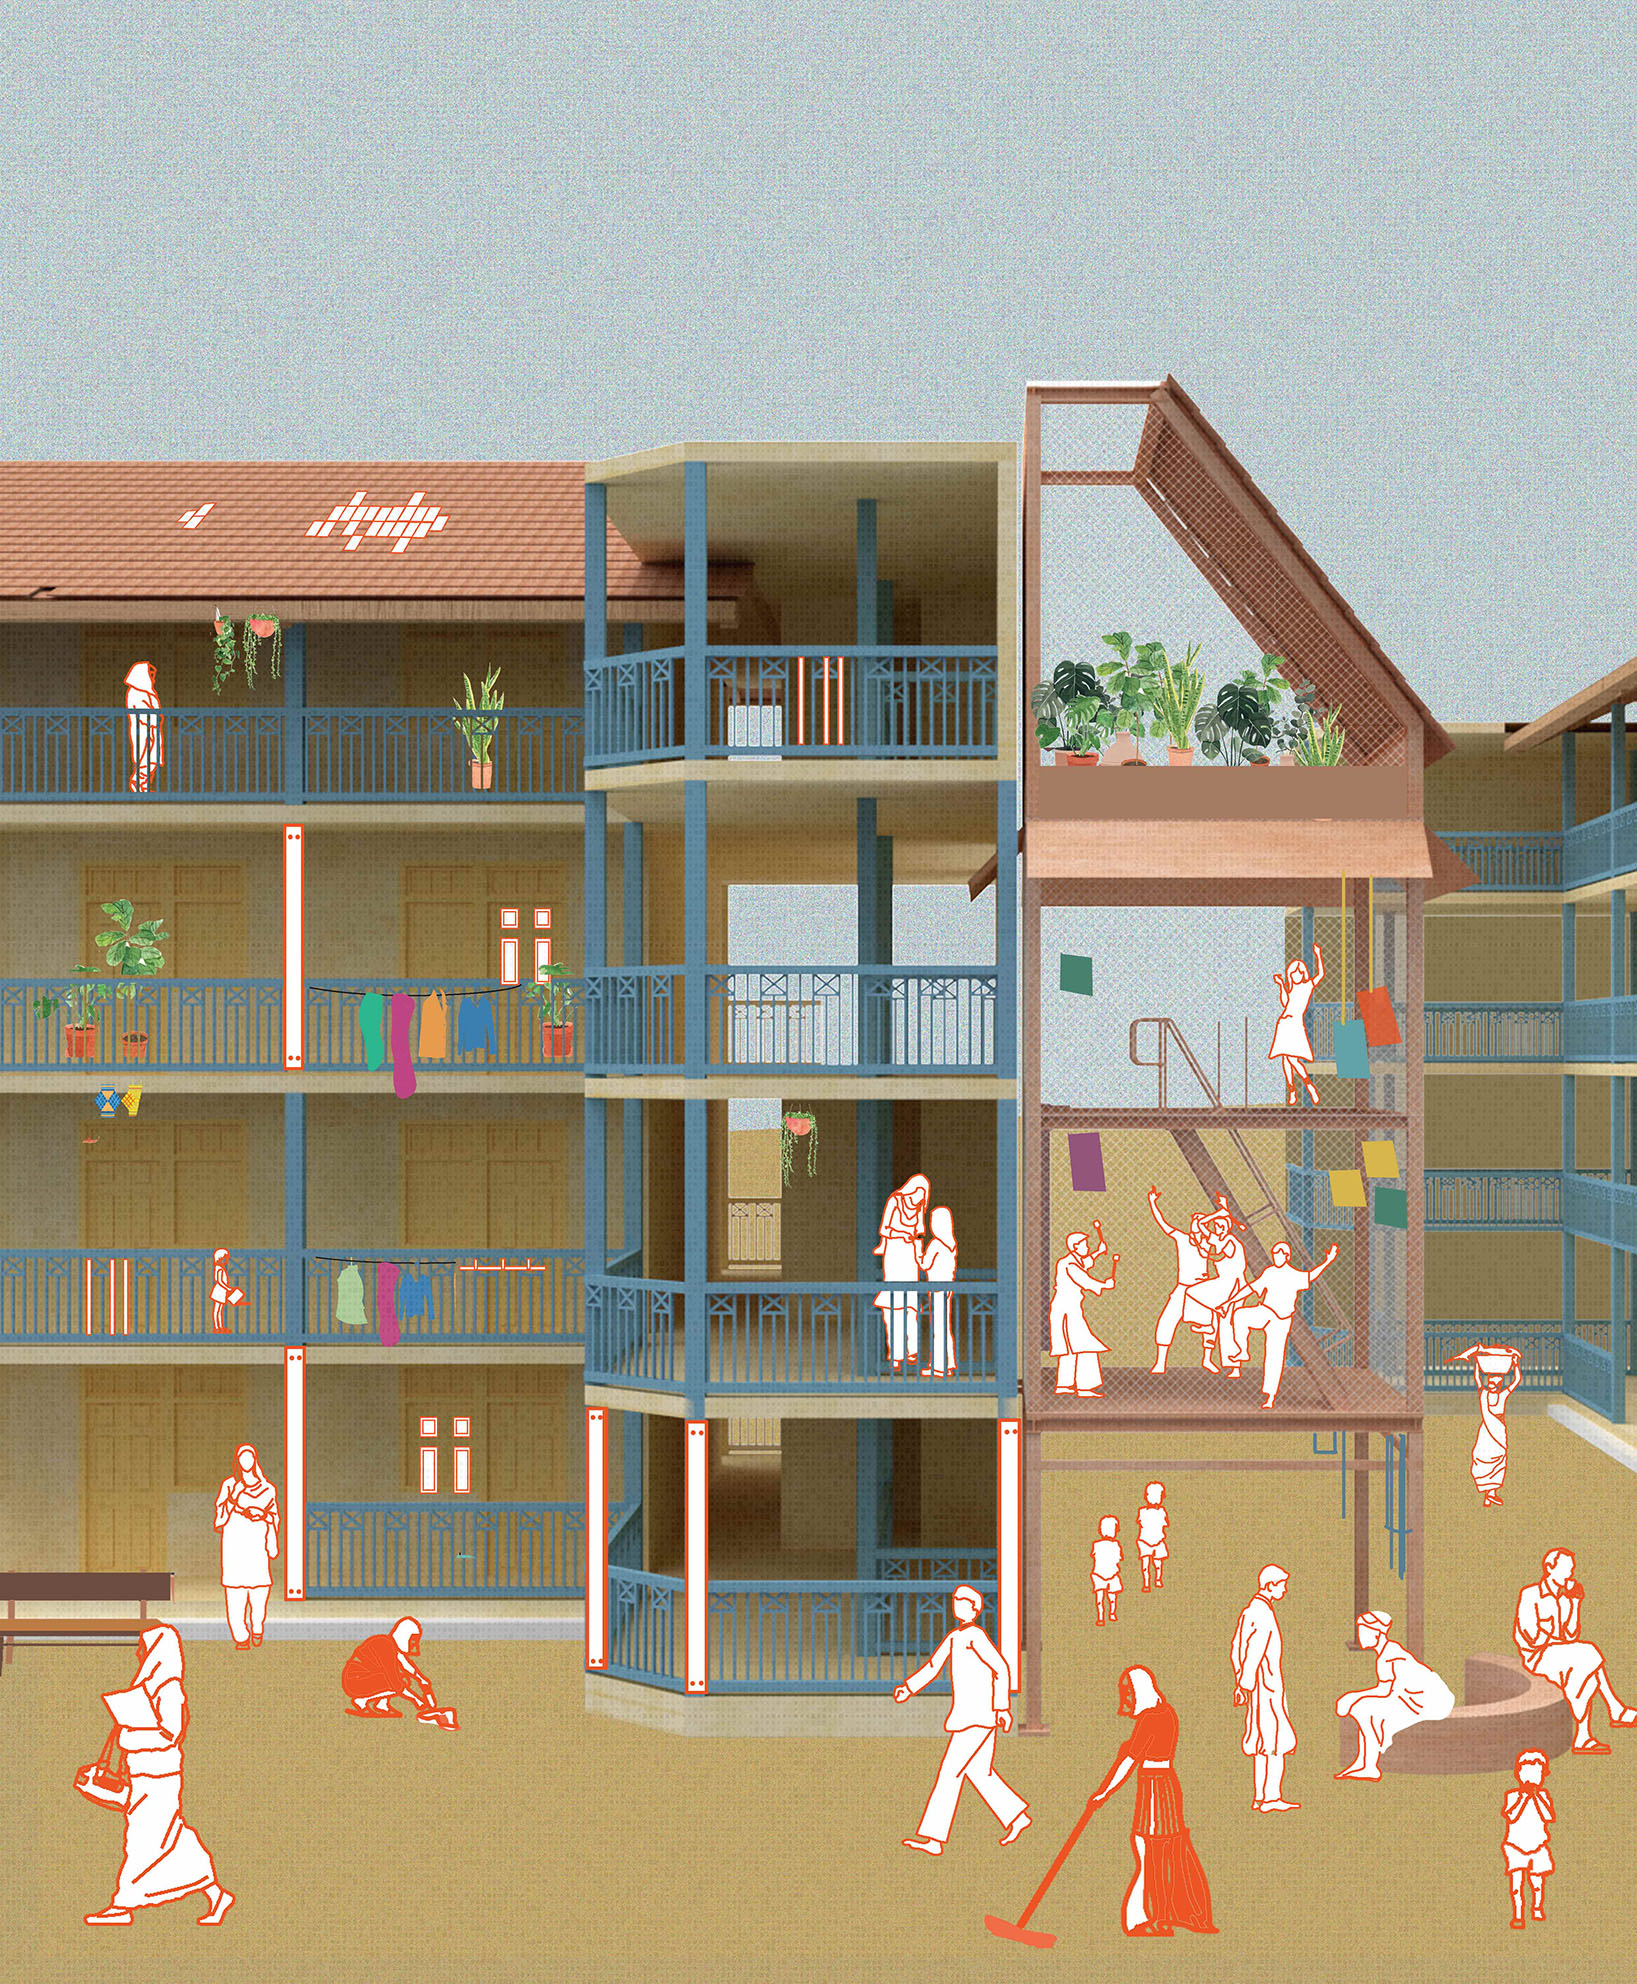 Rendered section drawing bubbling with people living within the integrated housing units.